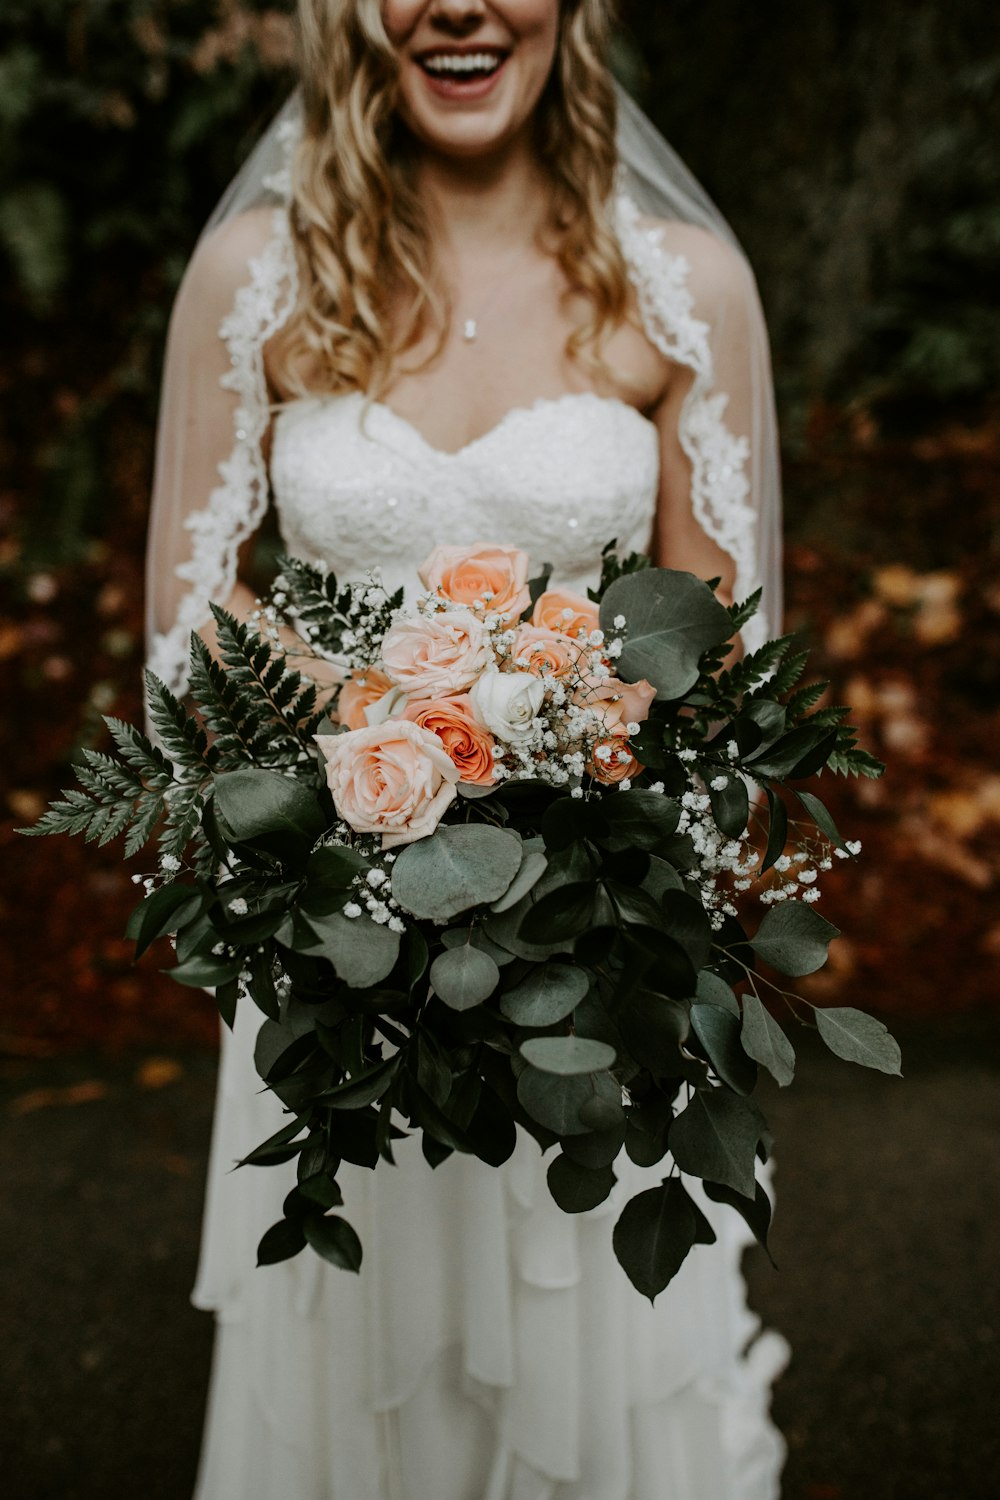 woman wearing wedding gown holding rose bouquet